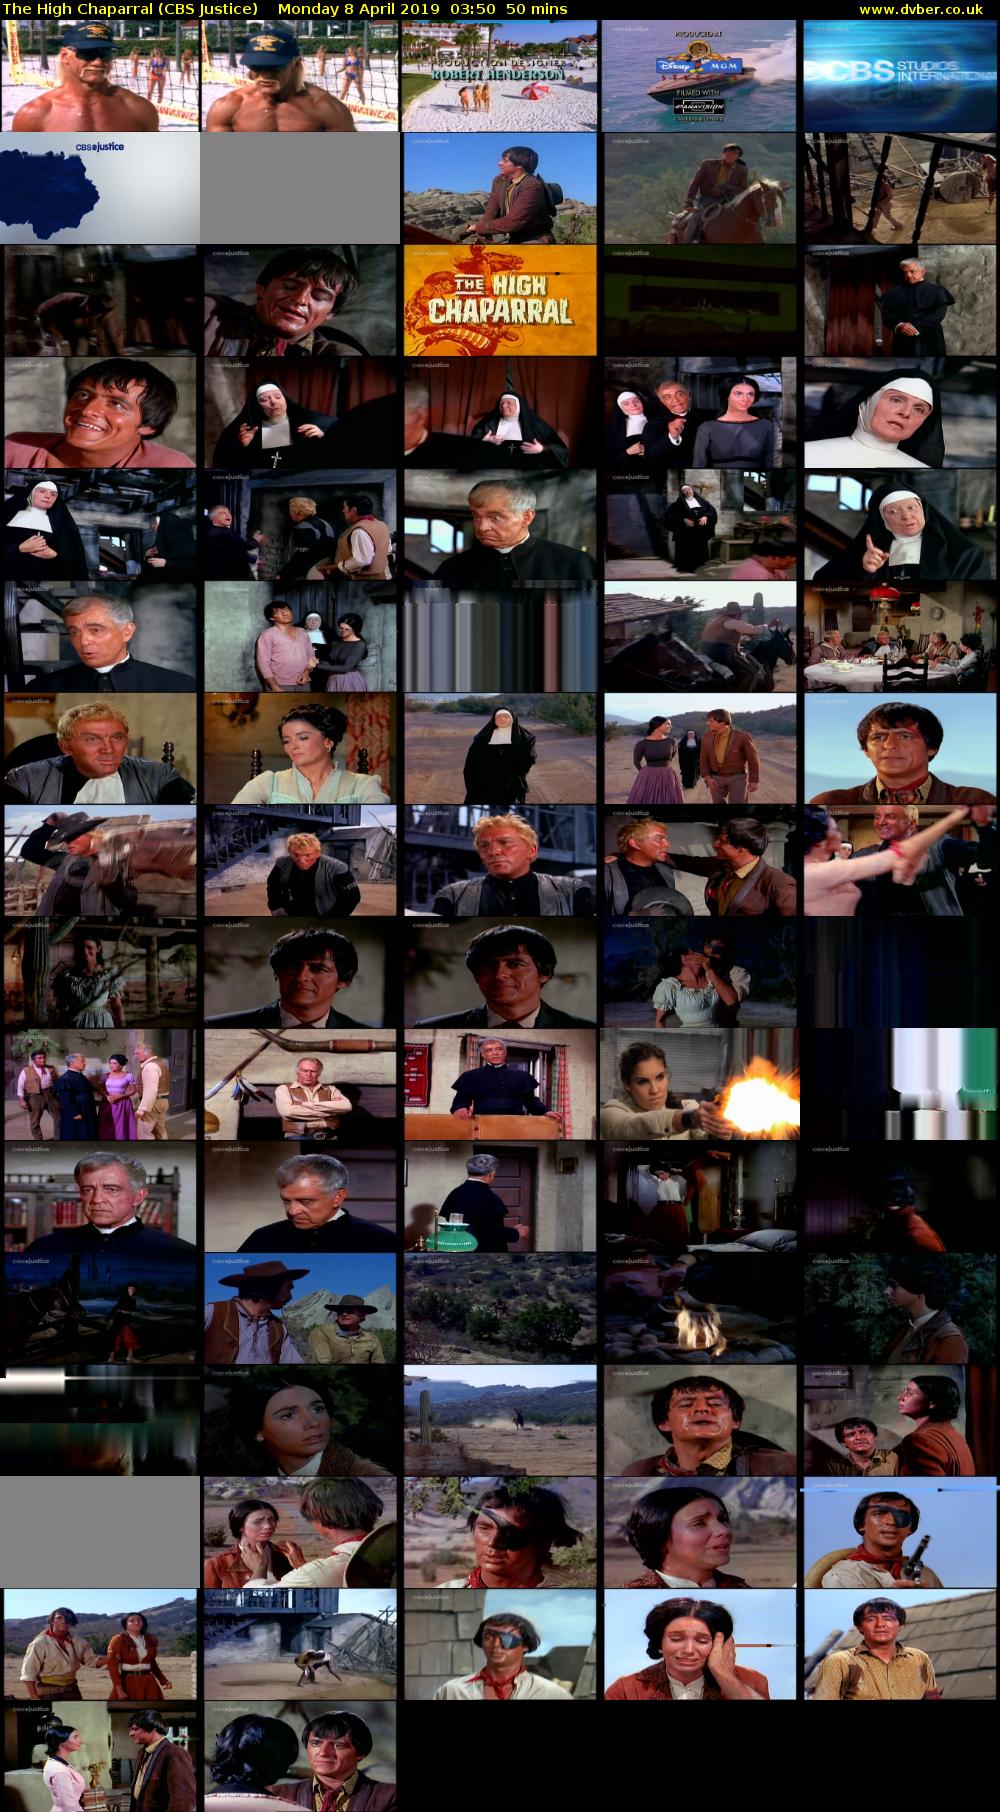 The High Chaparral (CBS Justice) Monday 8 April 2019 03:50 - 04:40